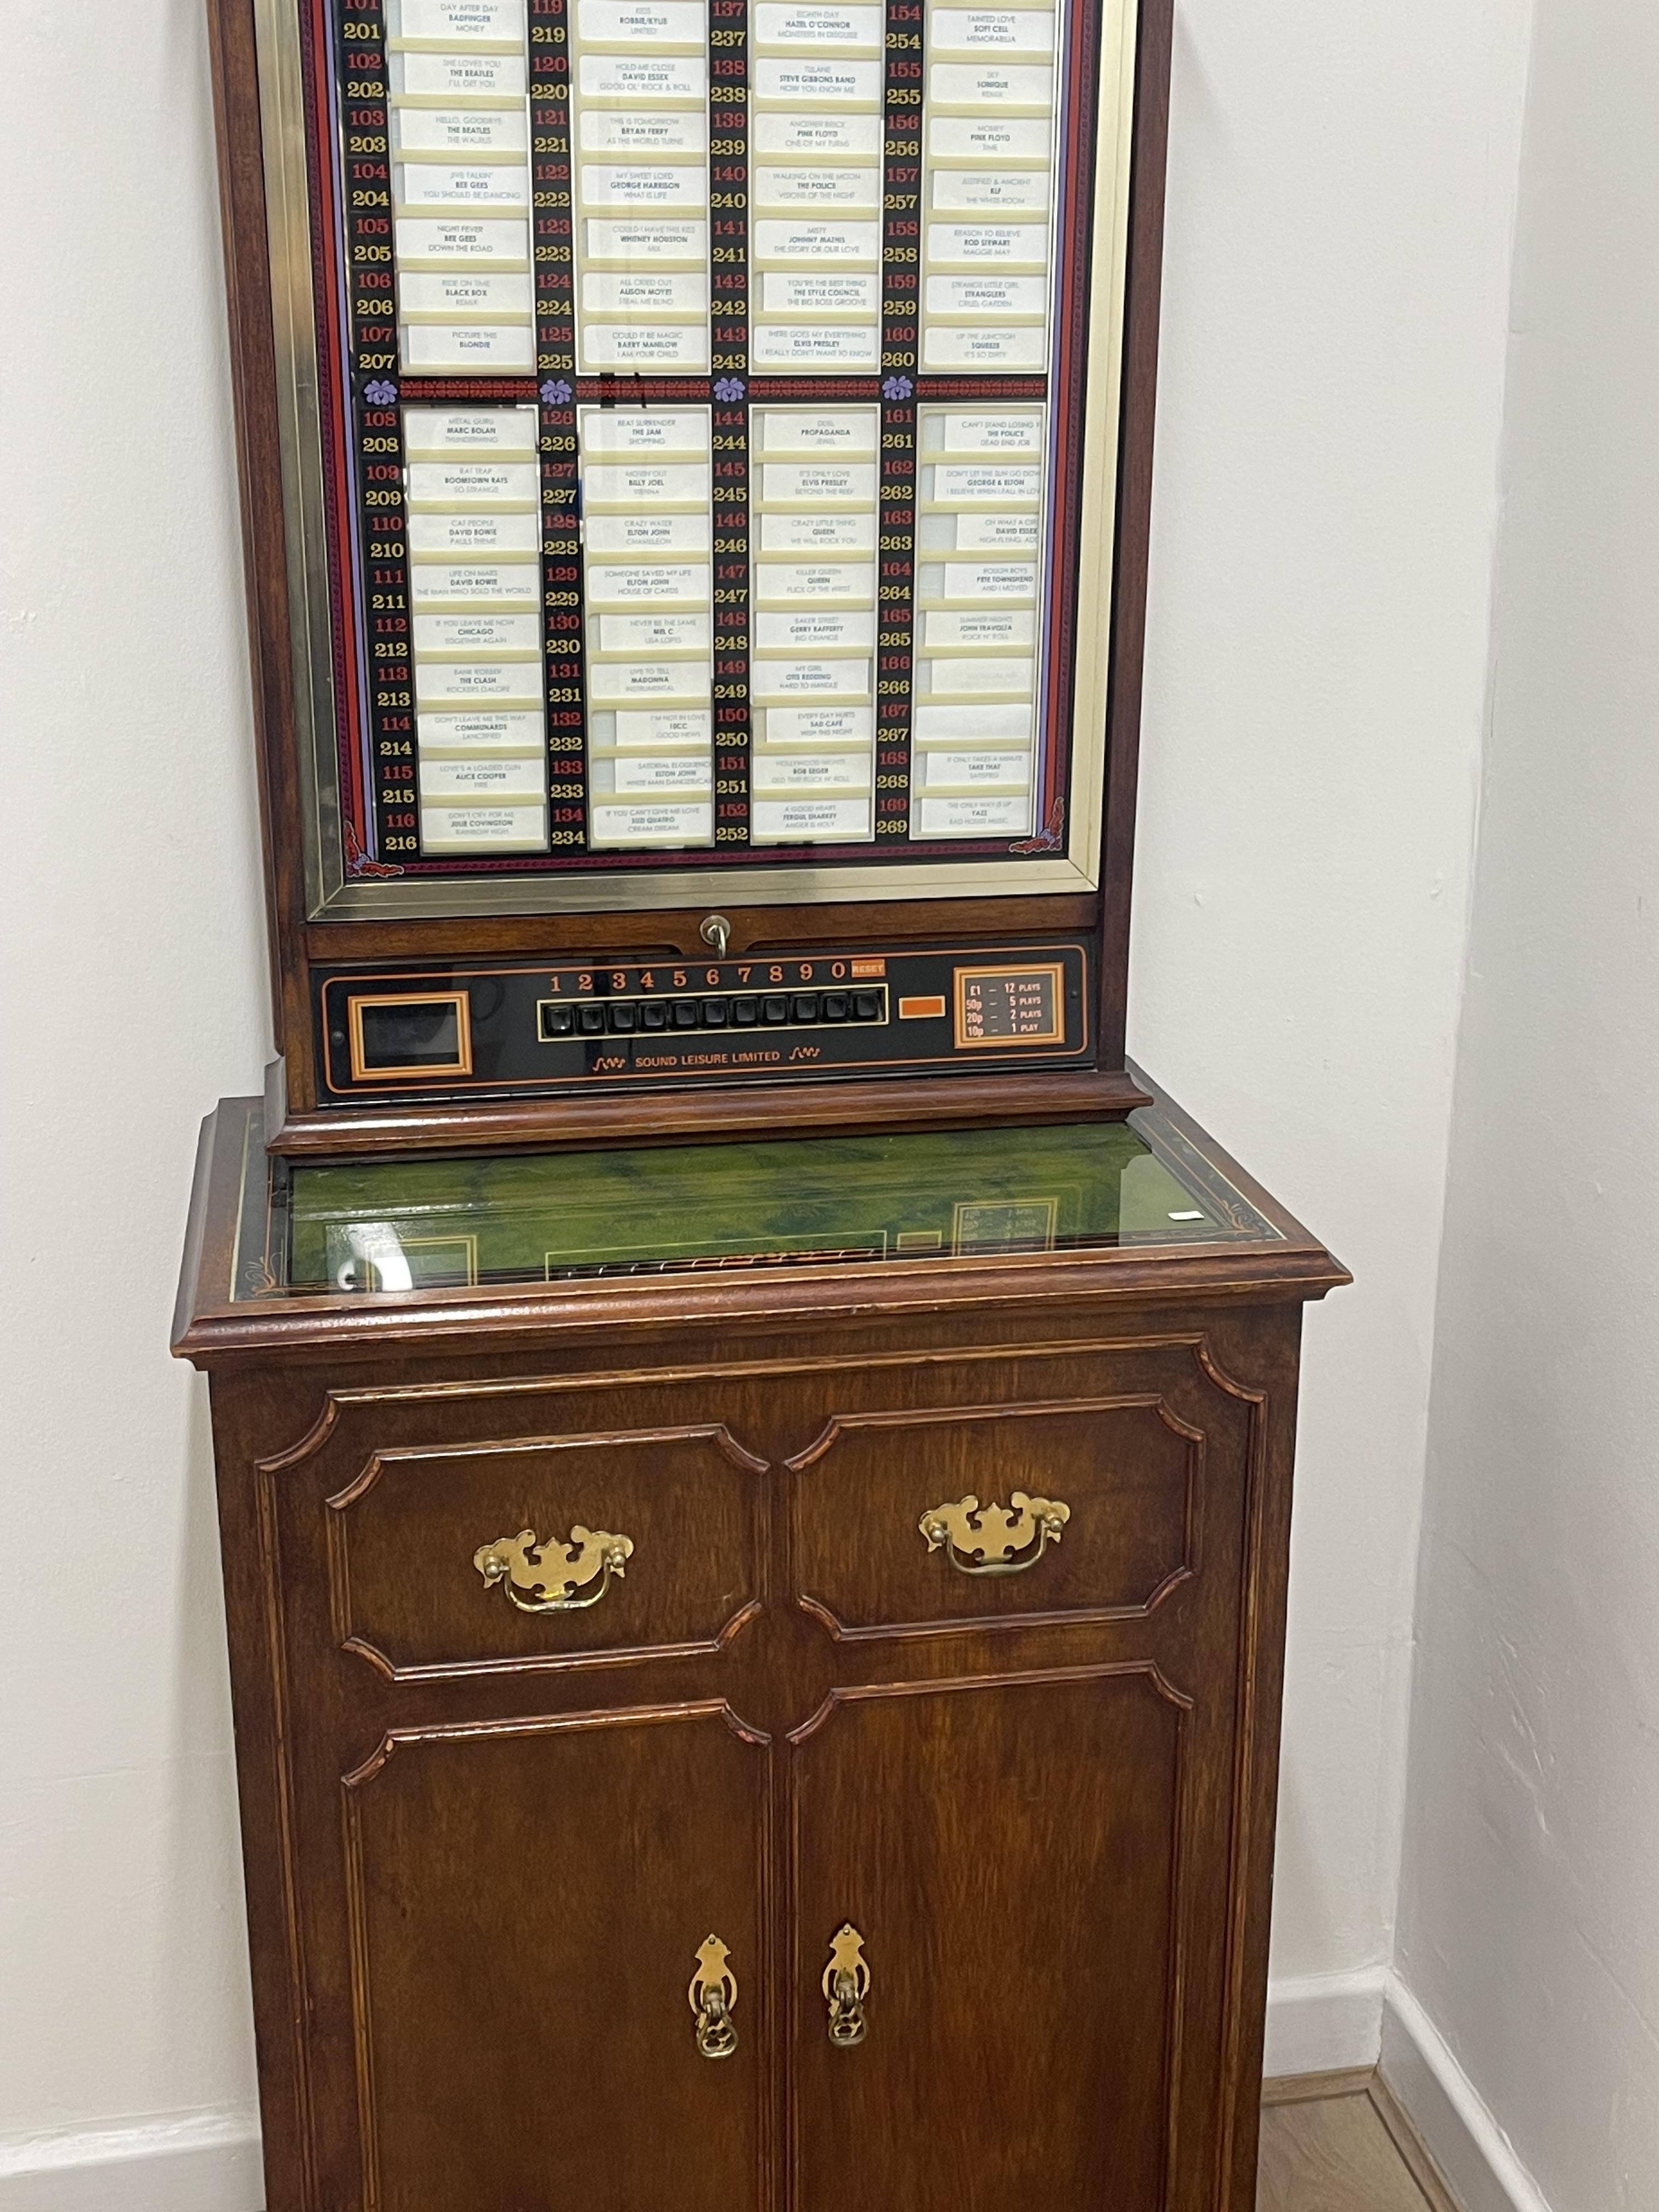 Regency “Sound leisure limited” juke box, with key & large quantity of 45’s records - H172 W41 L64 - Image 7 of 7